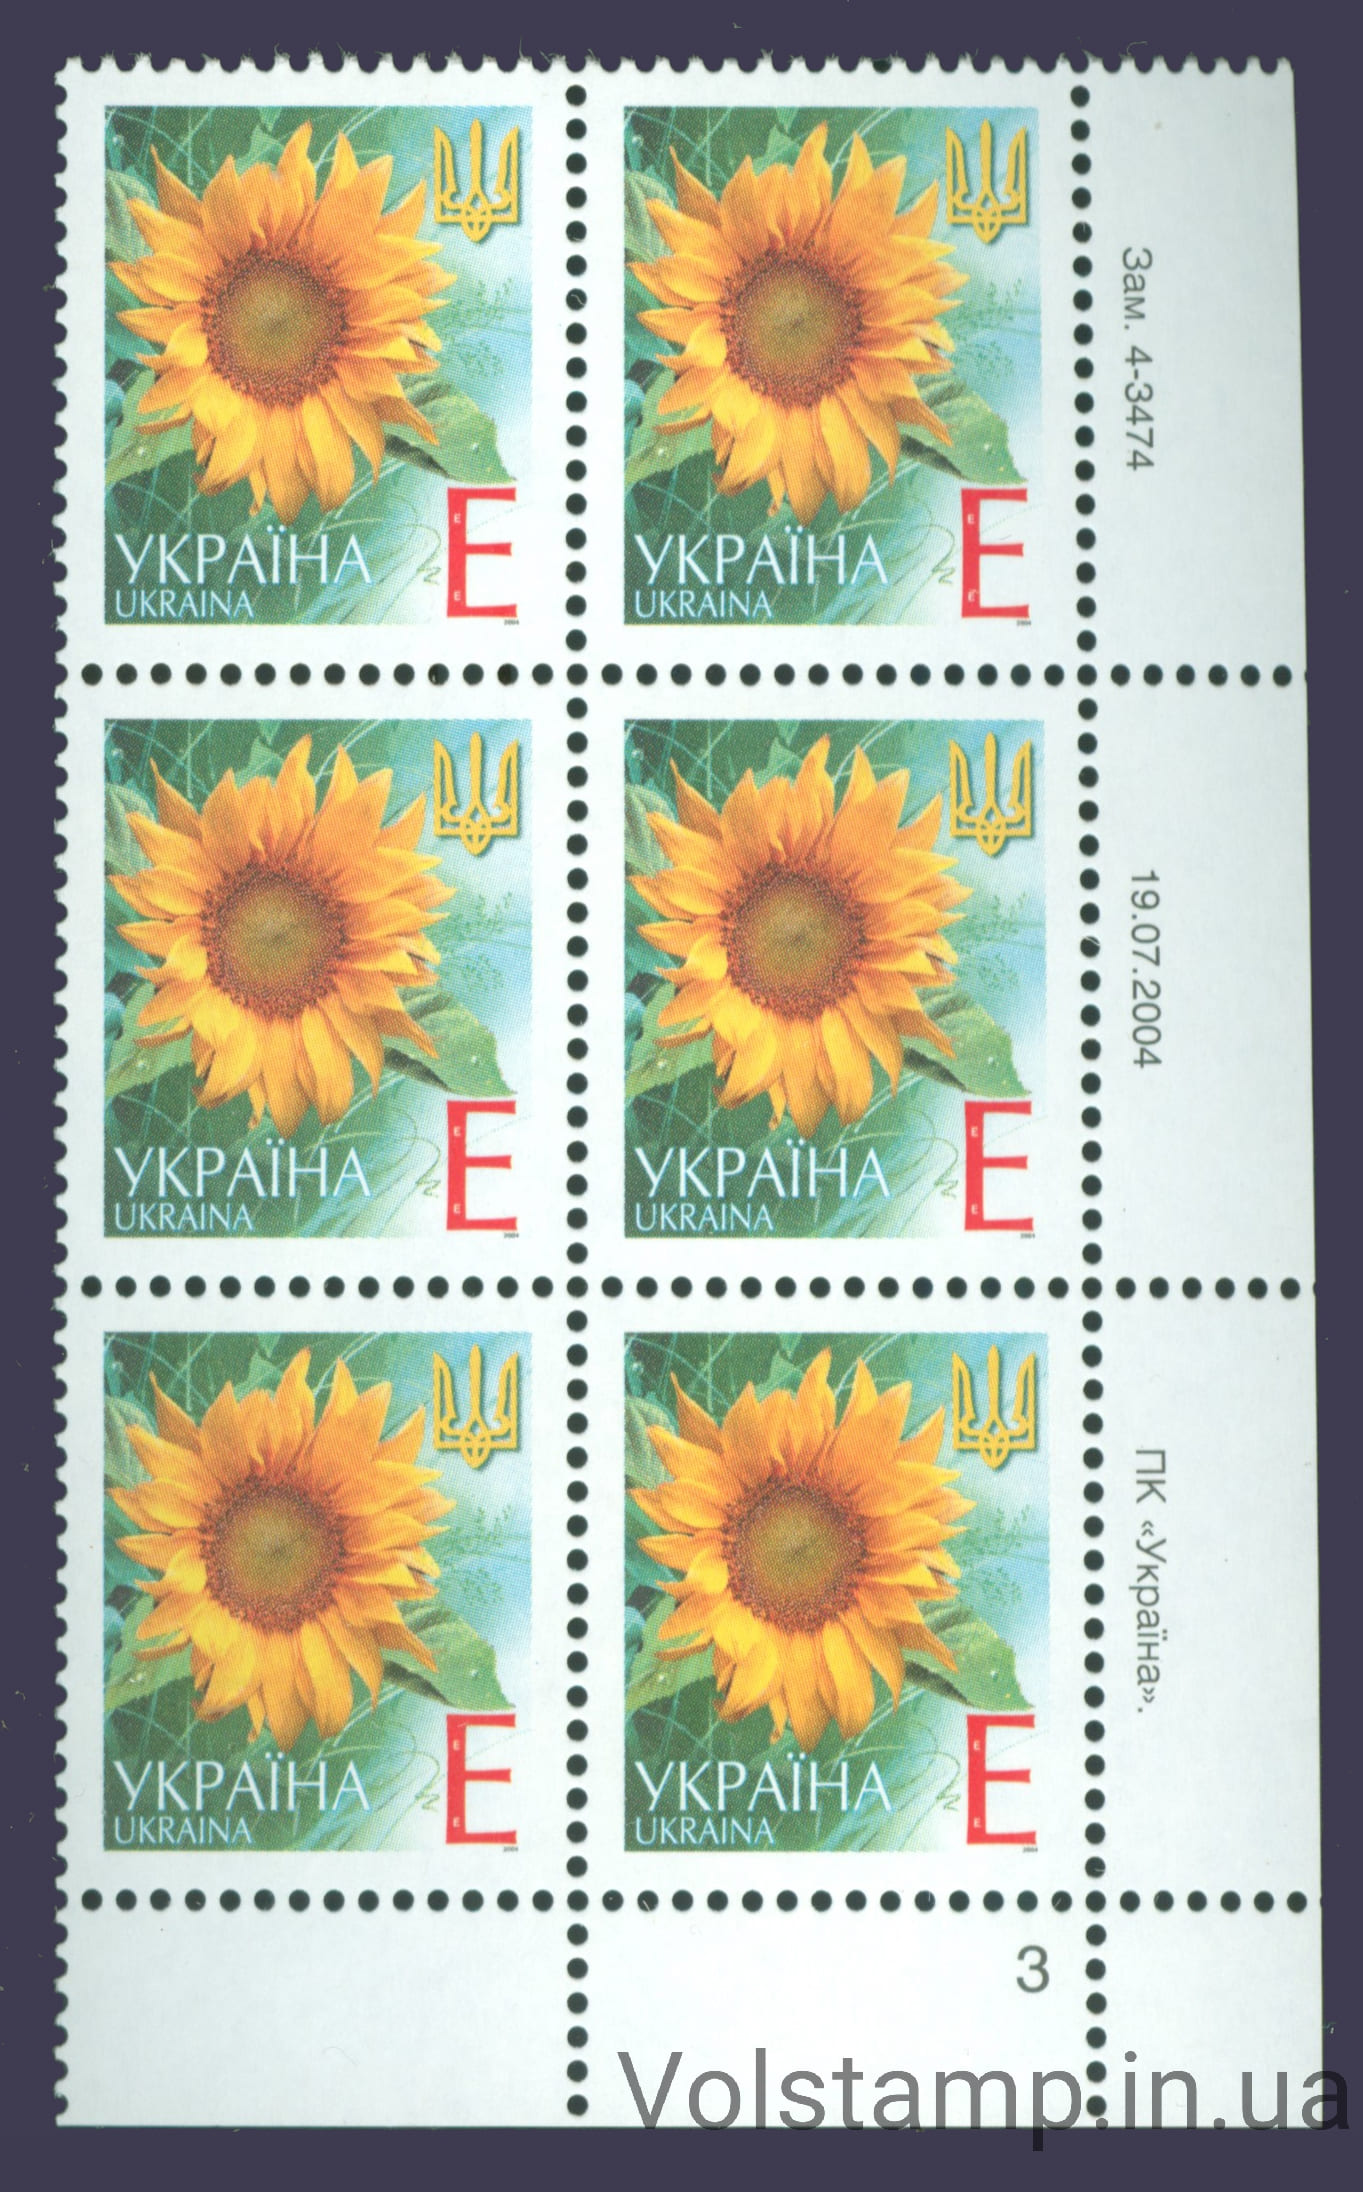 19.07.2004 Standard sixblock E (right bottom by numbers) - to choose from №4-3474